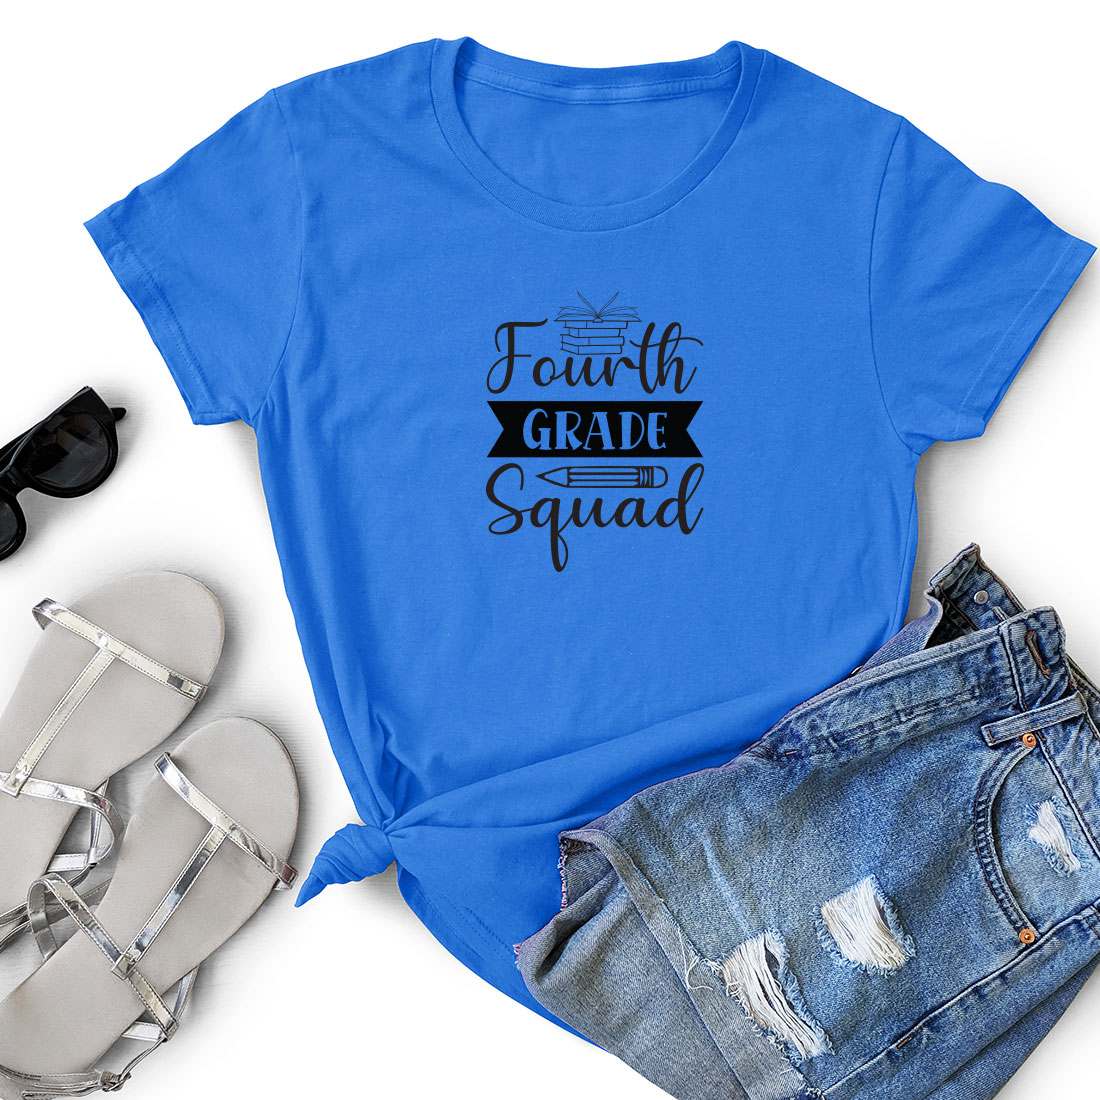 T - shirt that says fourth grade squad next to a pair of shorts.